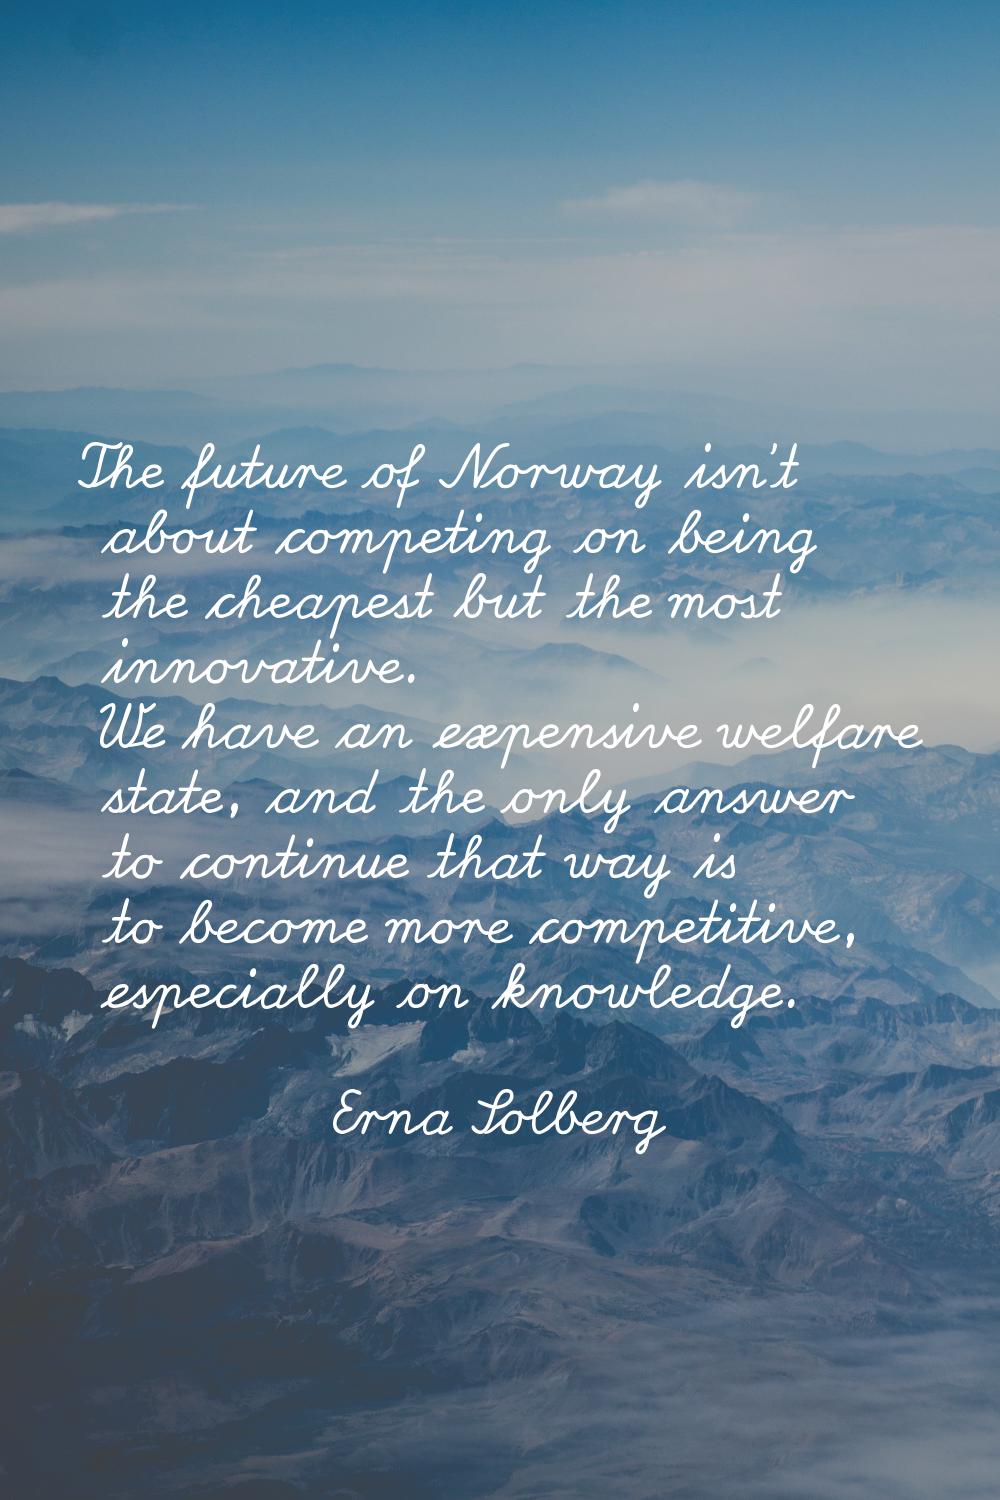 The future of Norway isn't about competing on being the cheapest but the most innovative. We have a